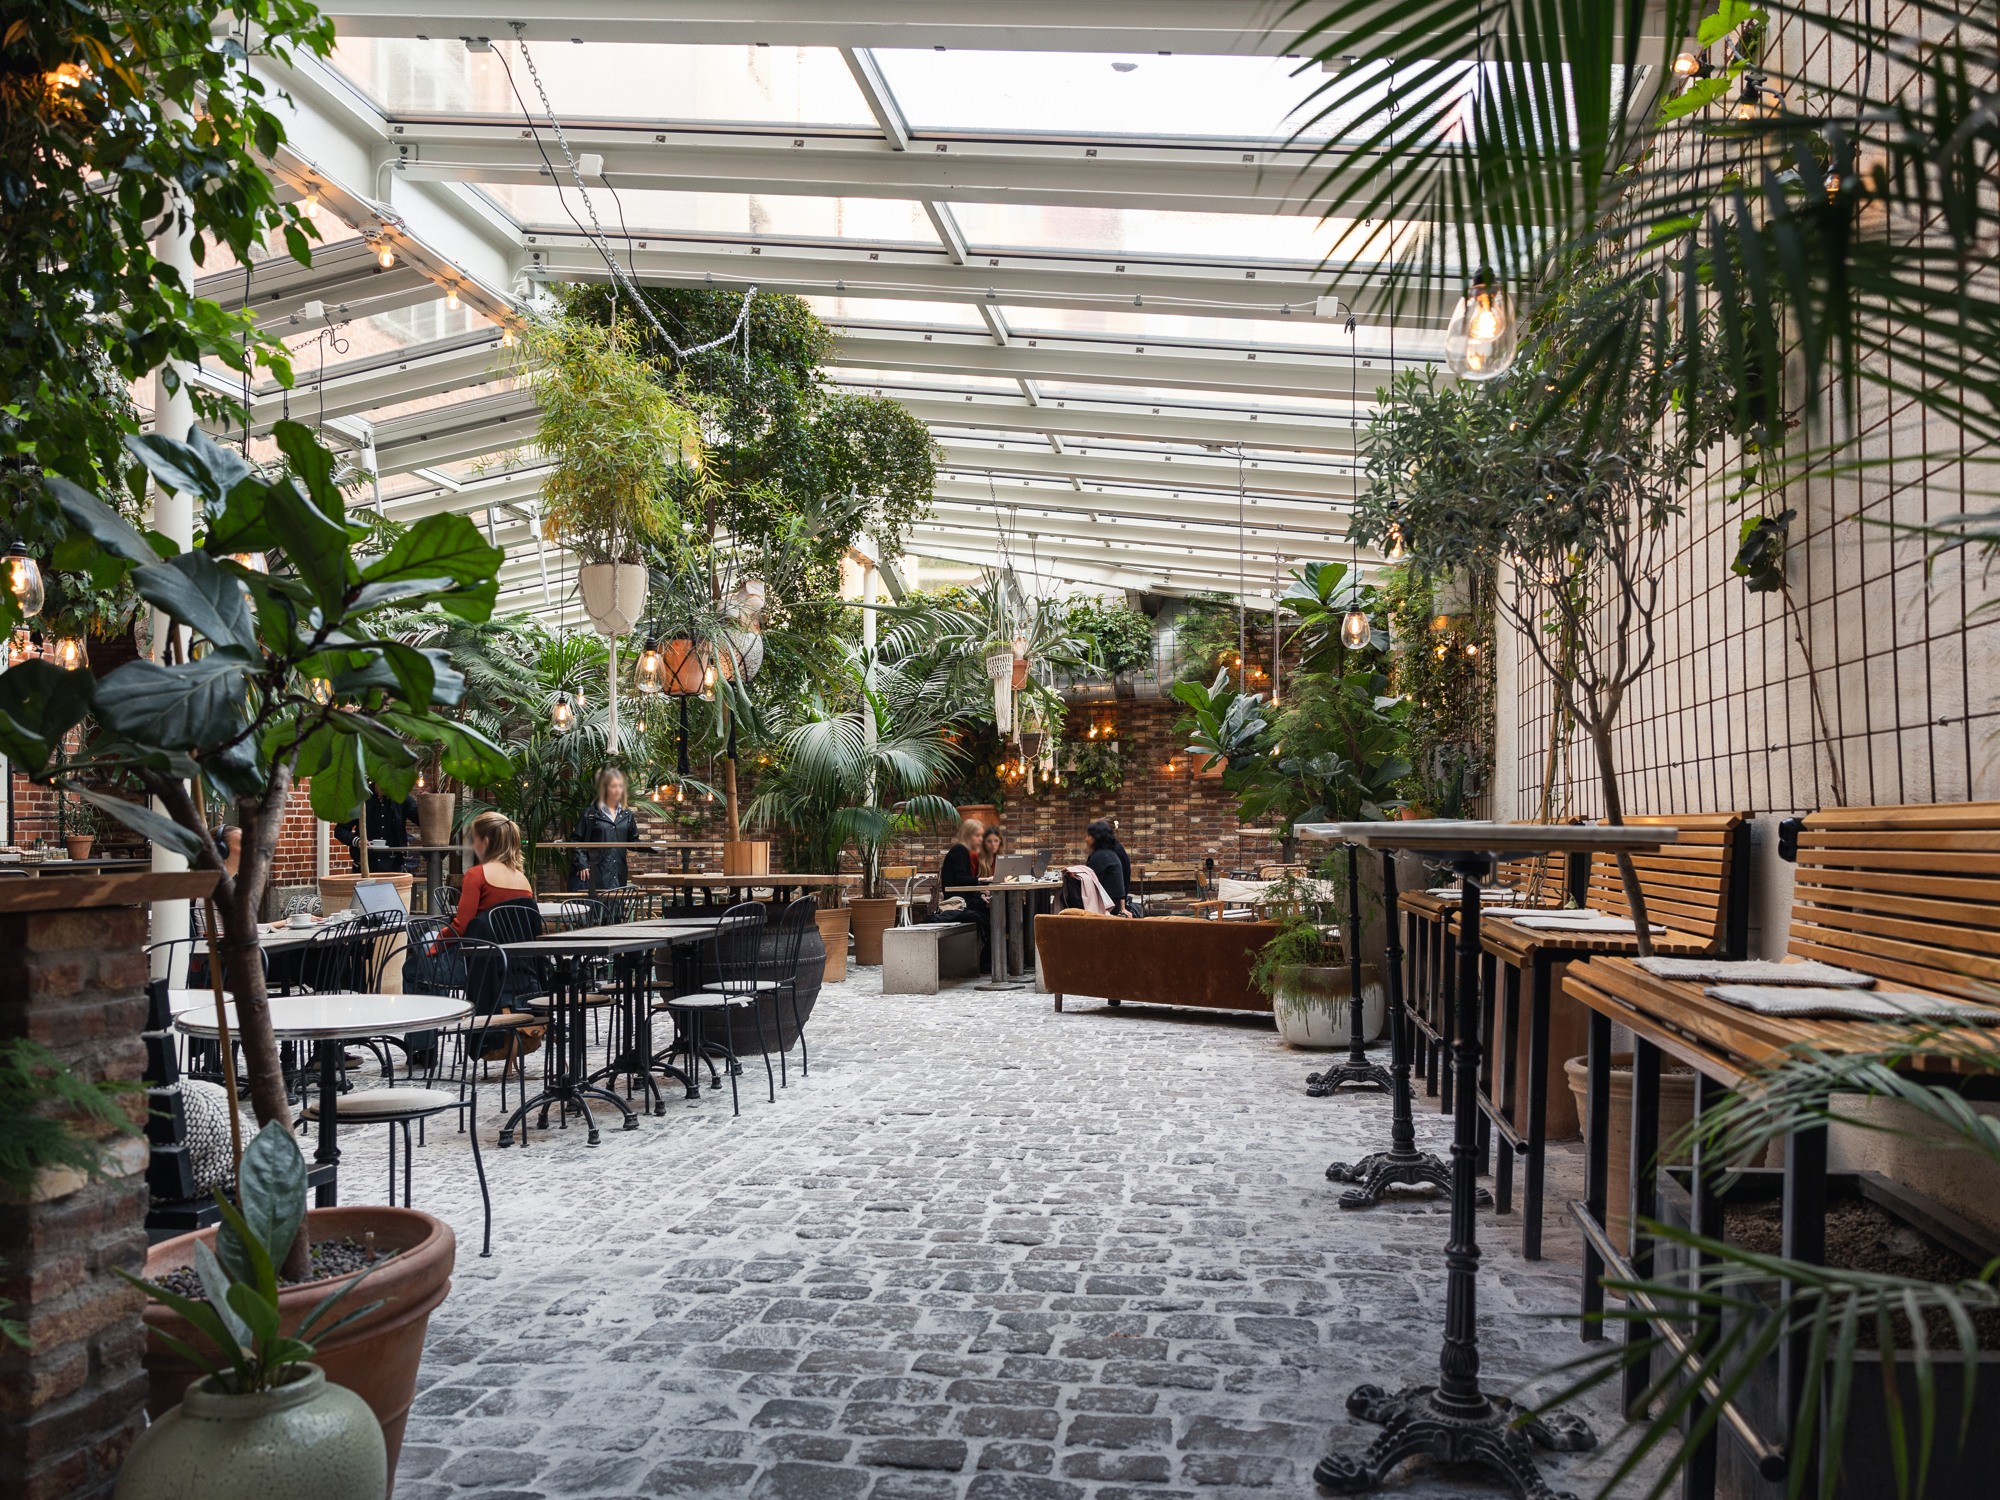 café with glass ceiling and plants ha nging